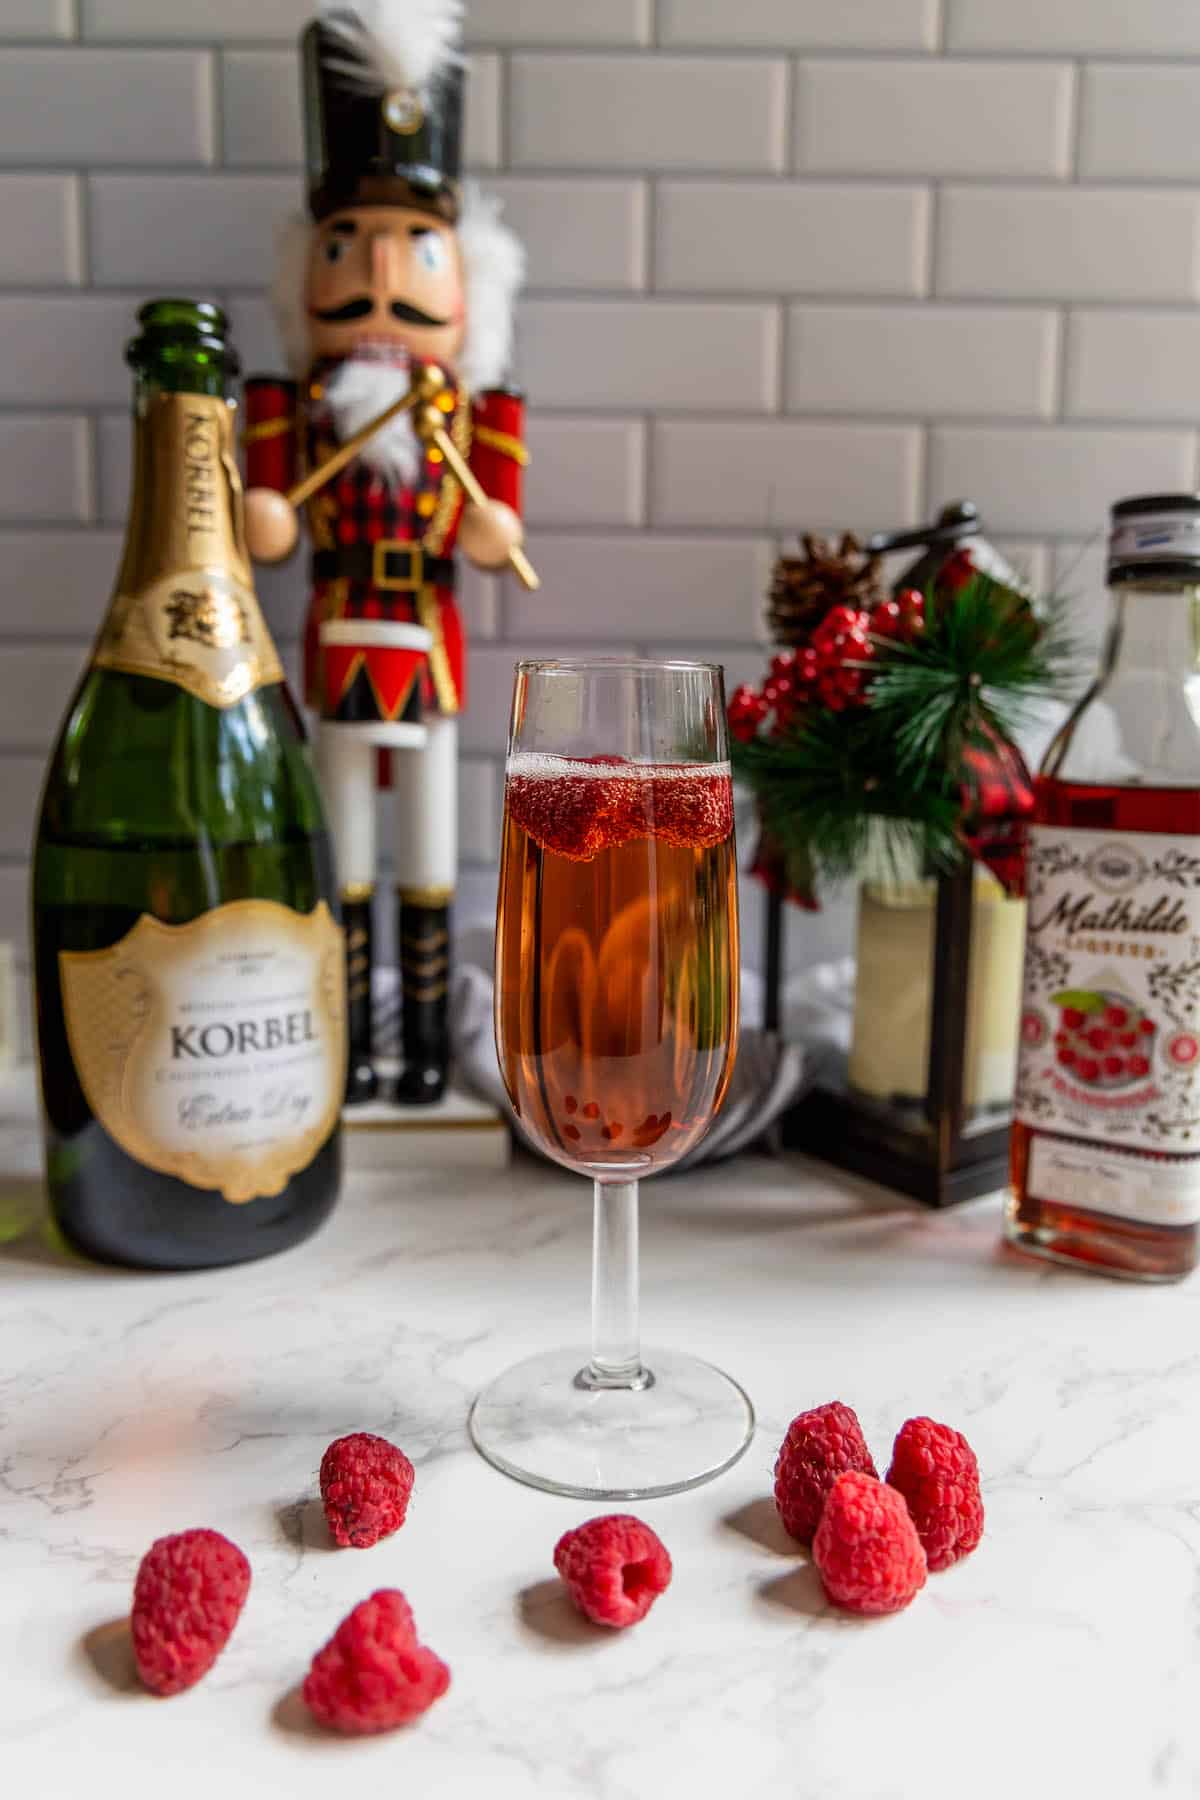 A raspberry champagne sparkler garnished with raspberries and served alongside a nutcracker.